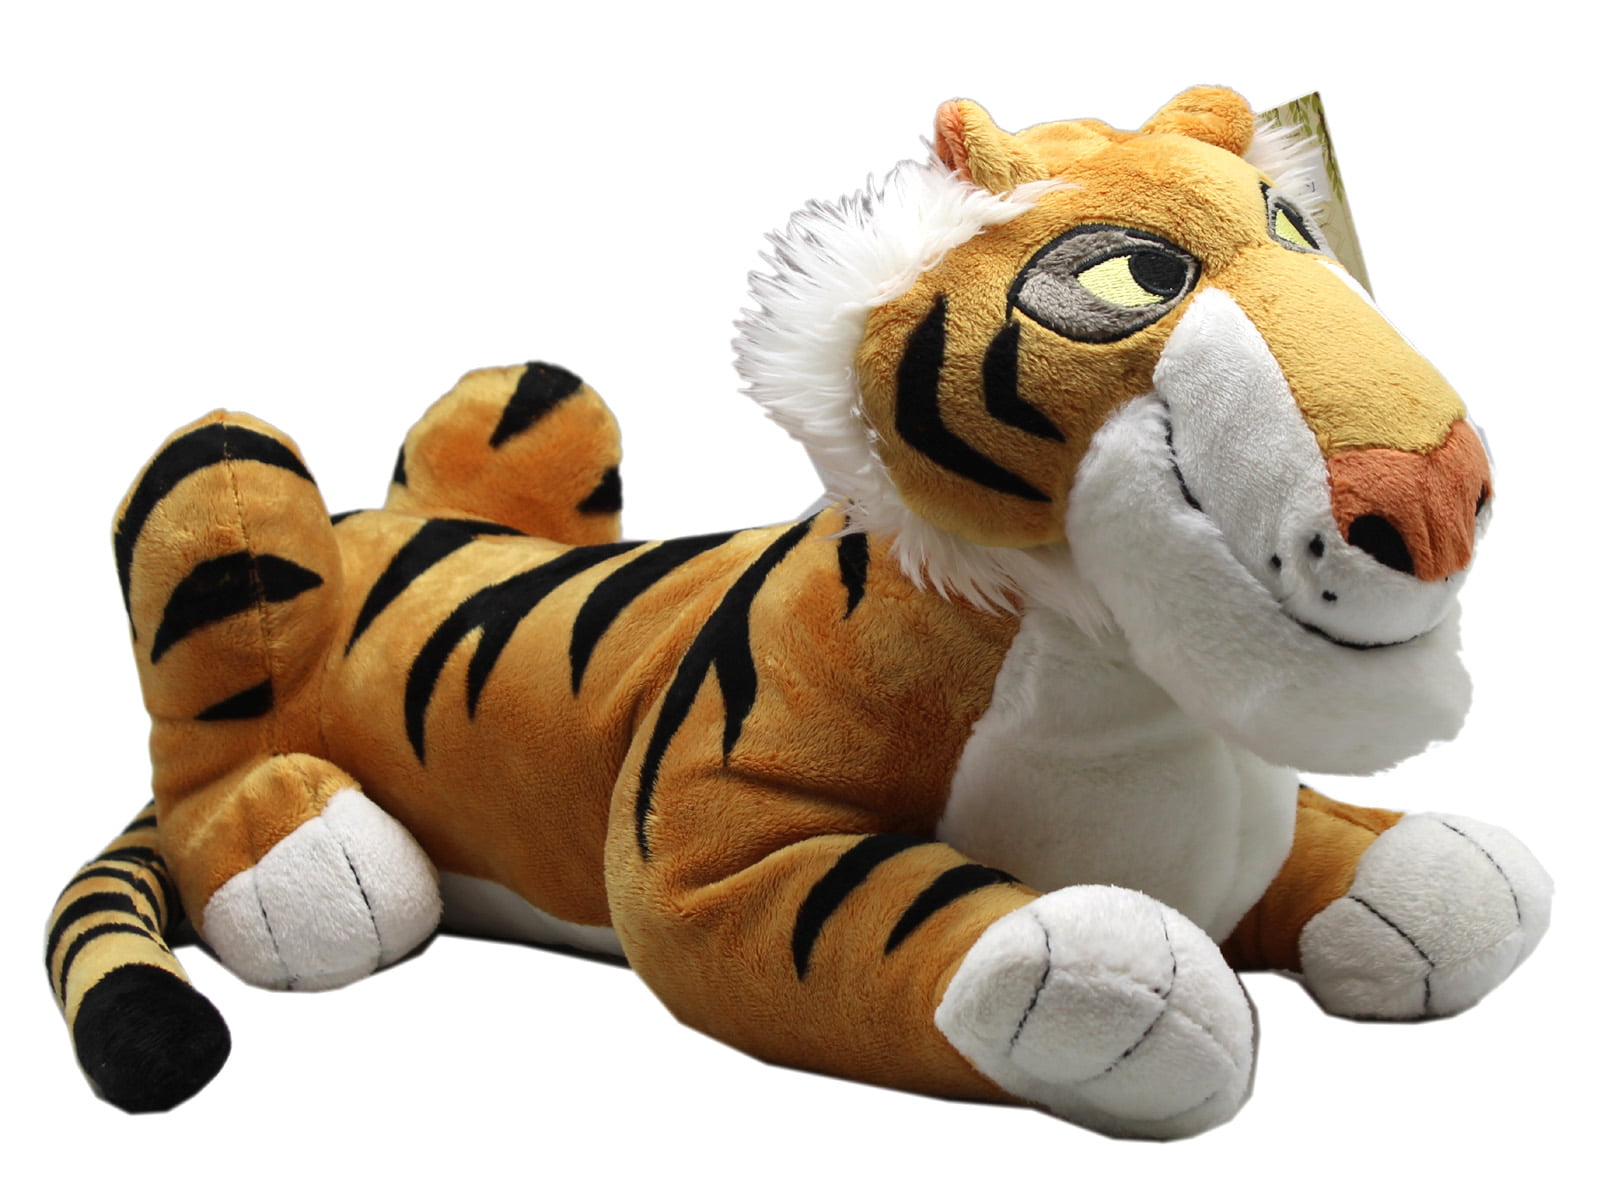 Details about   Disney The Jungle Book Shere Khan Tiger Plush Stuffed Animal Toy 15" Plus Tail 